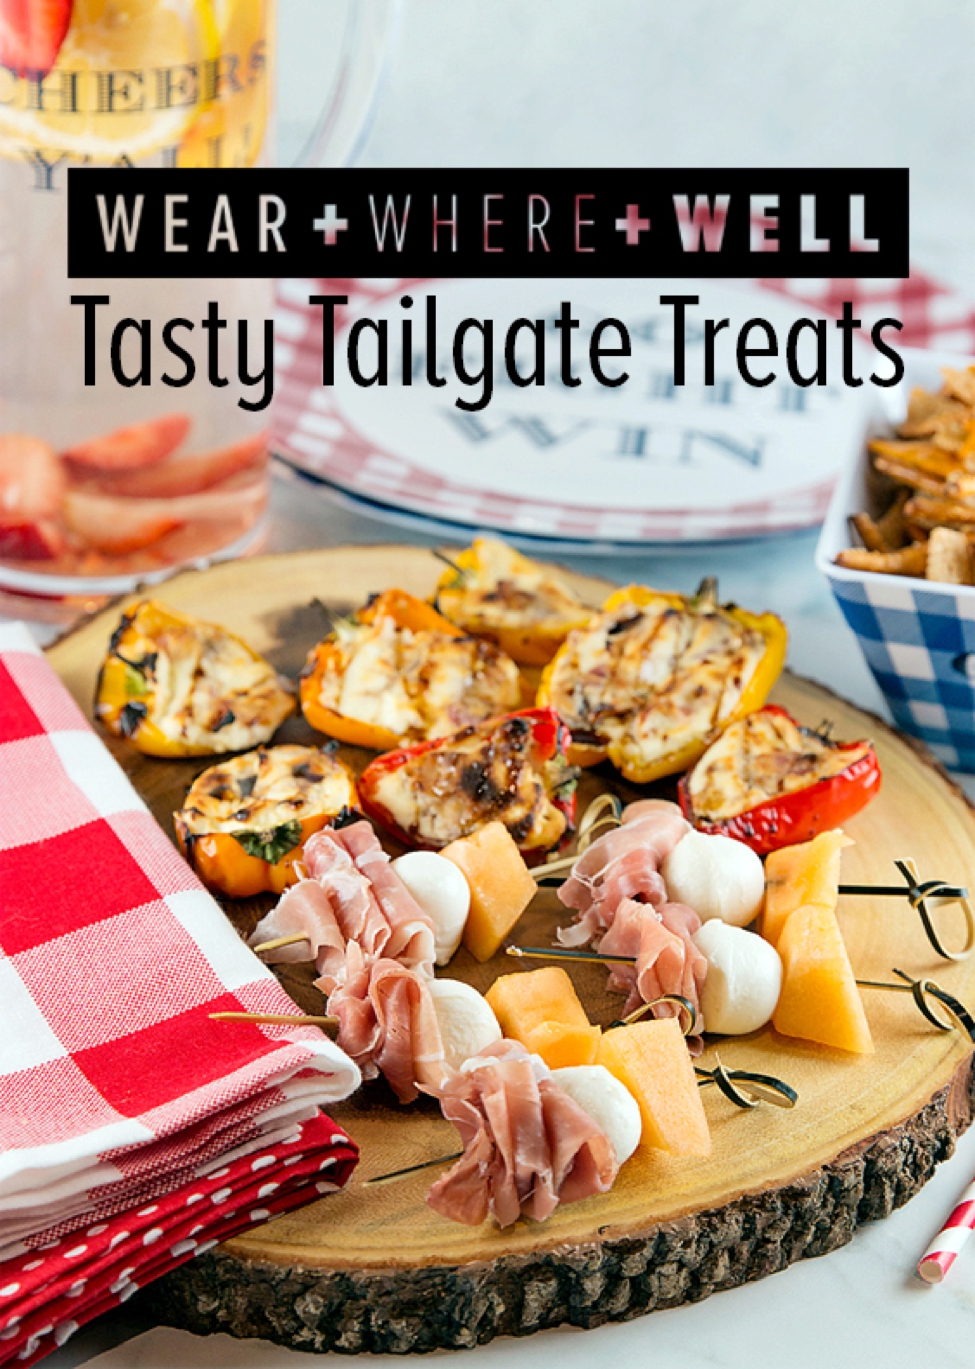 Wear Where Well Football Tailgating Recipes with Draper James_0001